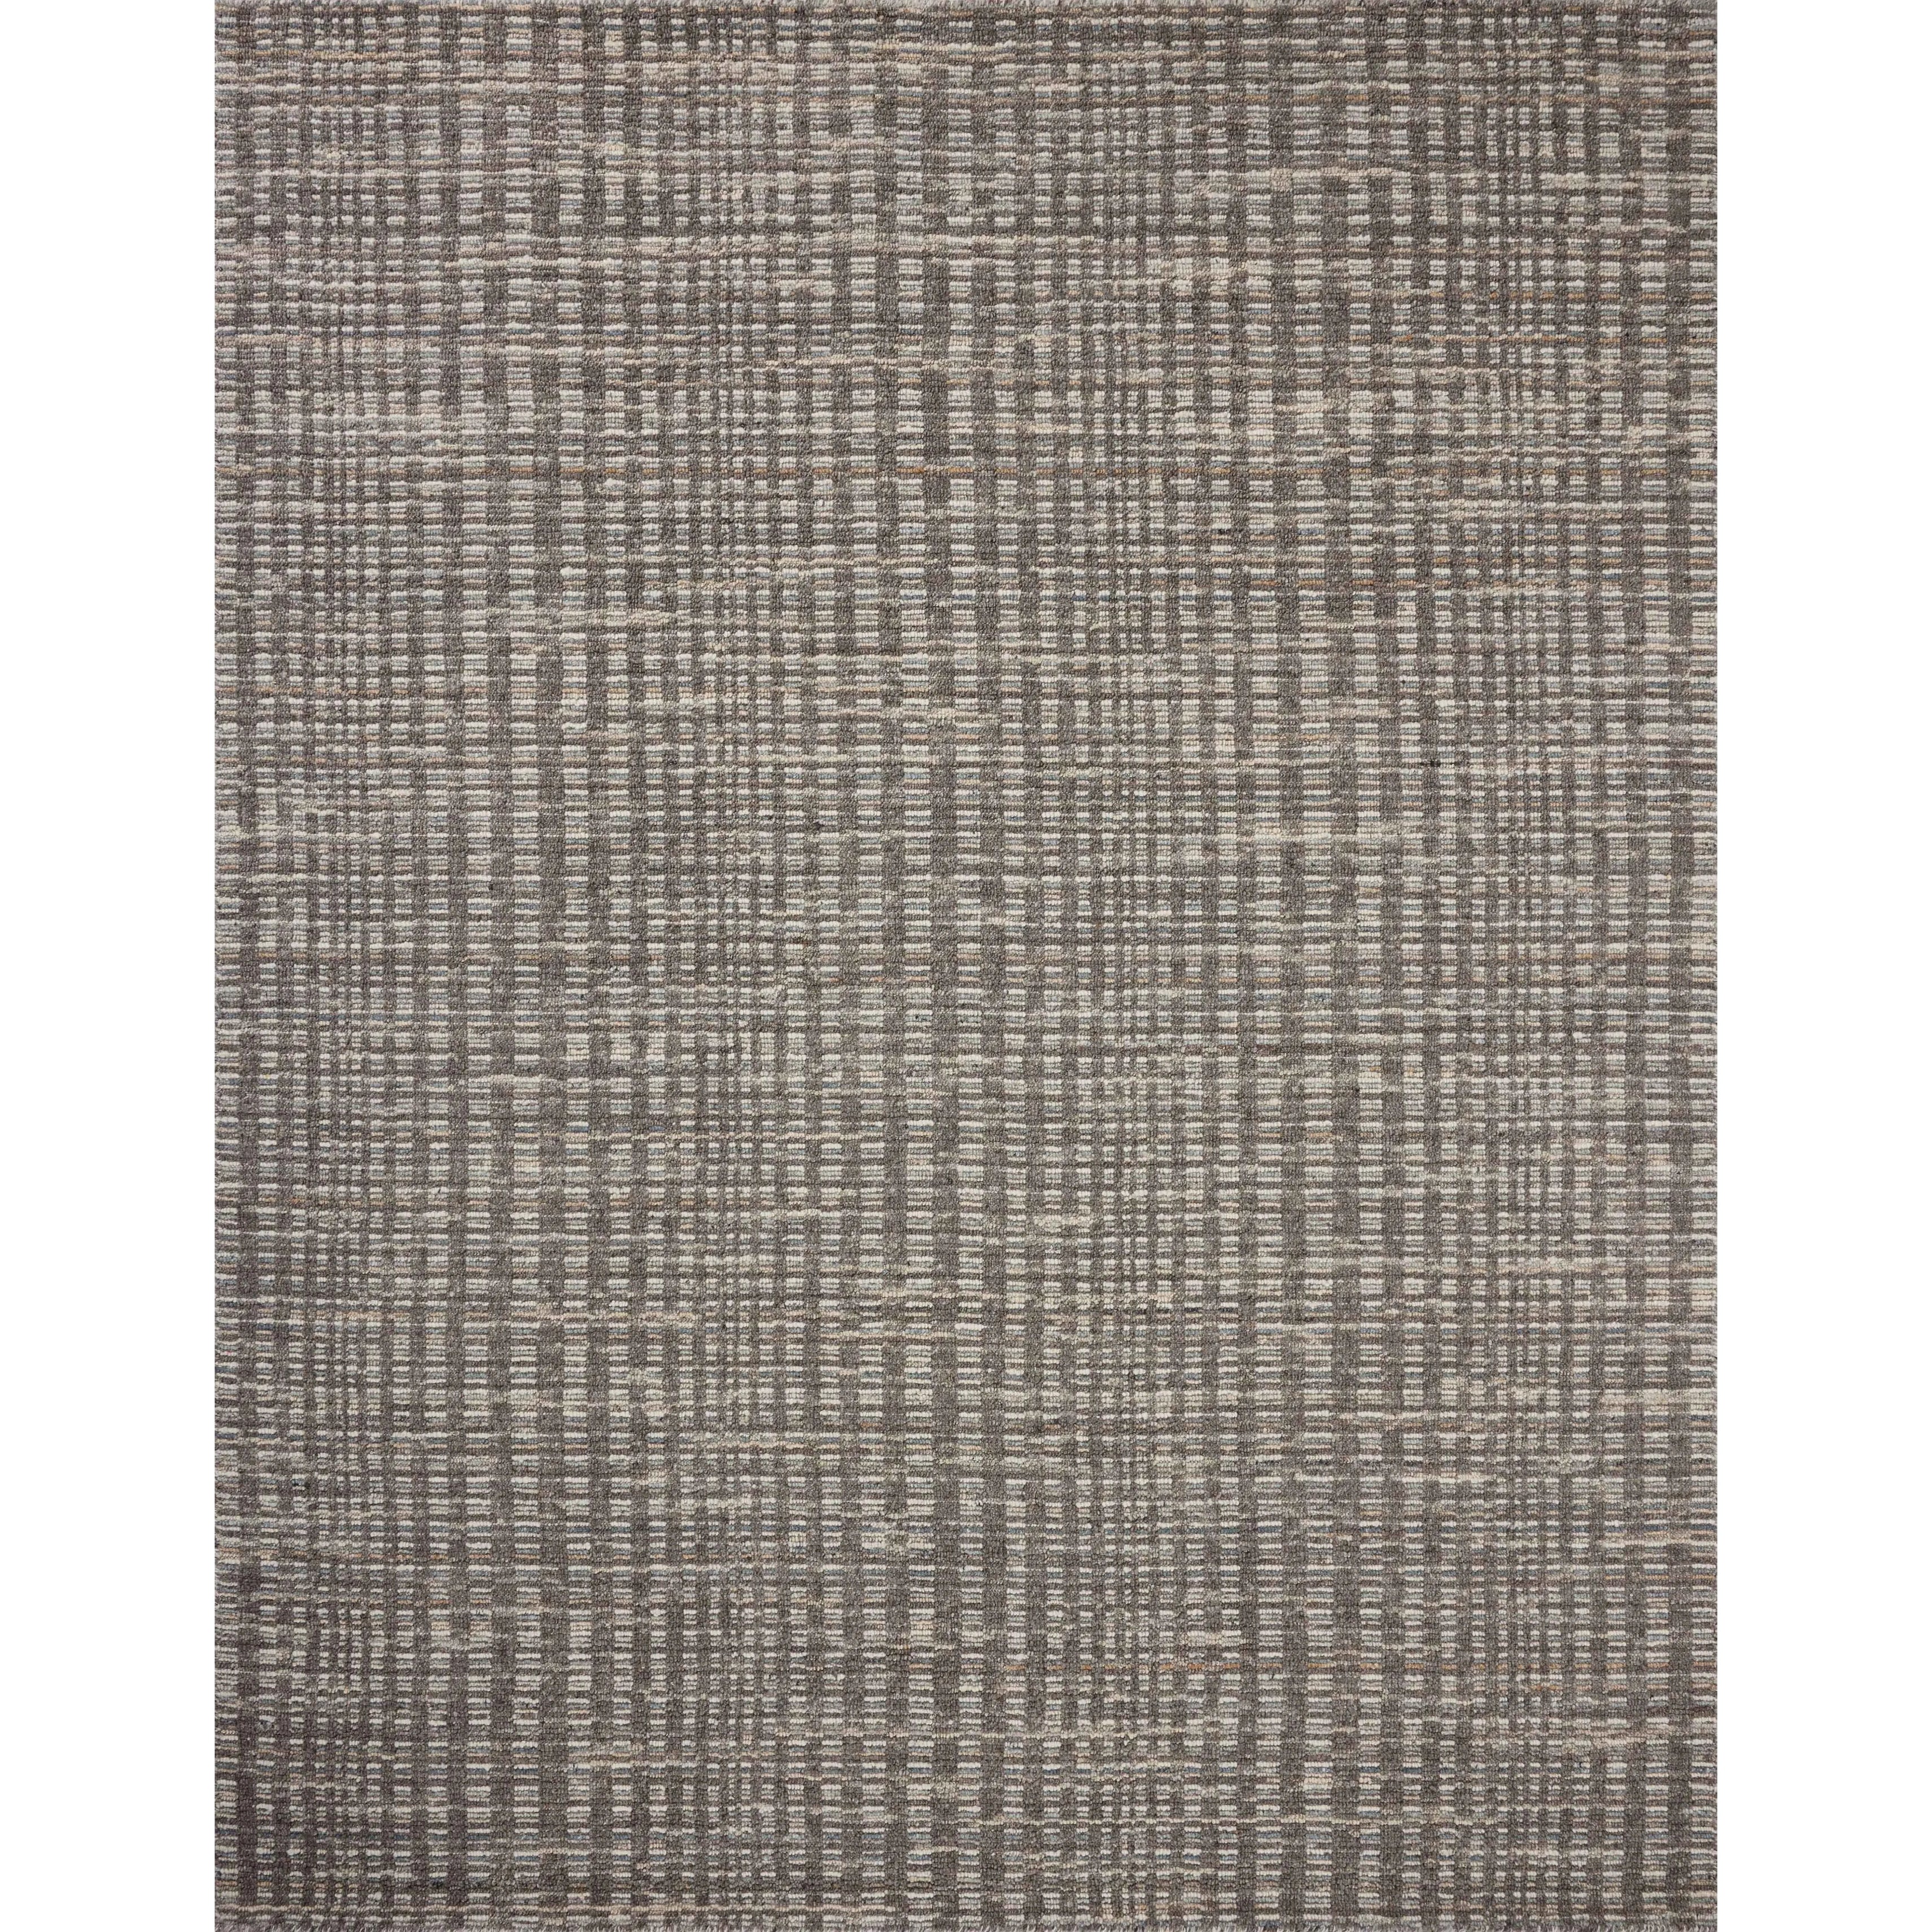 The Sonya Granite / Multi Rug is a hand-loomed area rug with a light, airy palette and understated graphic design. The rug’s textural pile is a soft blend of wool and nylon that creates dimension in living rooms, bedrooms, and more. Amethyst Home provides interior design, new home construction design consulting, vintage area rugs, and lighting in the Newport Beach metro area.